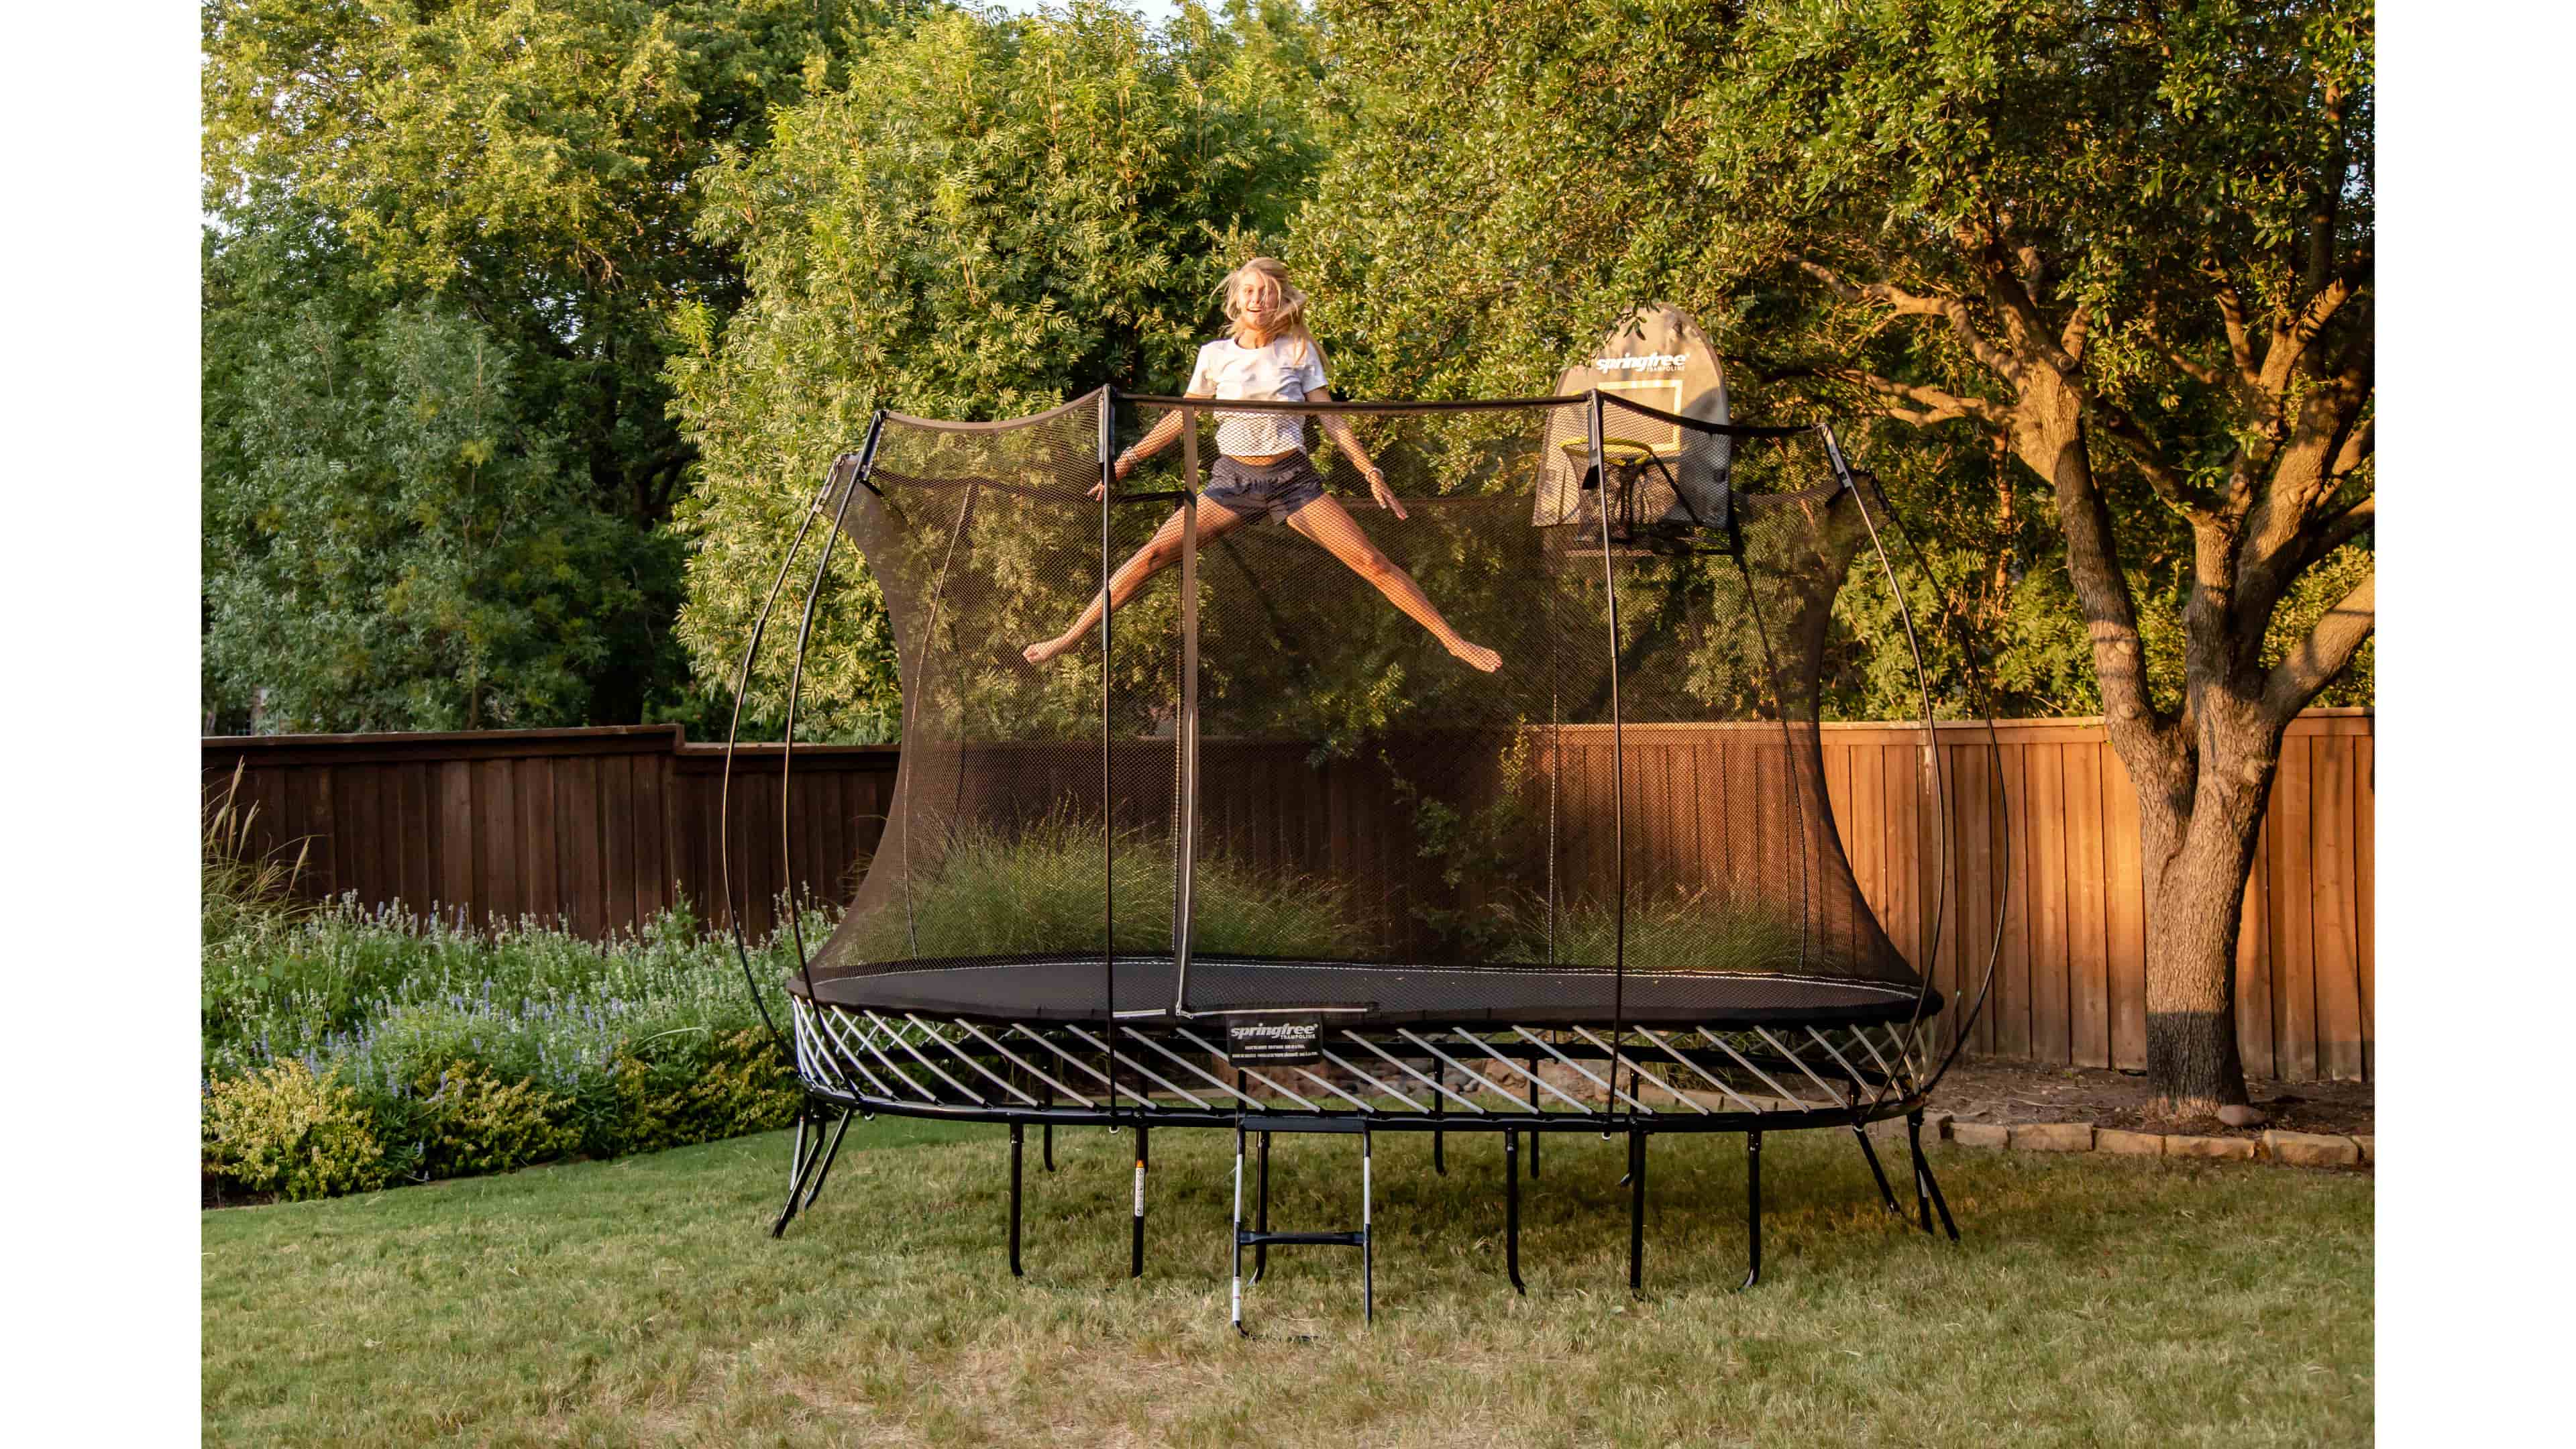 5 reasons why a mini-trampoline could help take your fitness to new heights